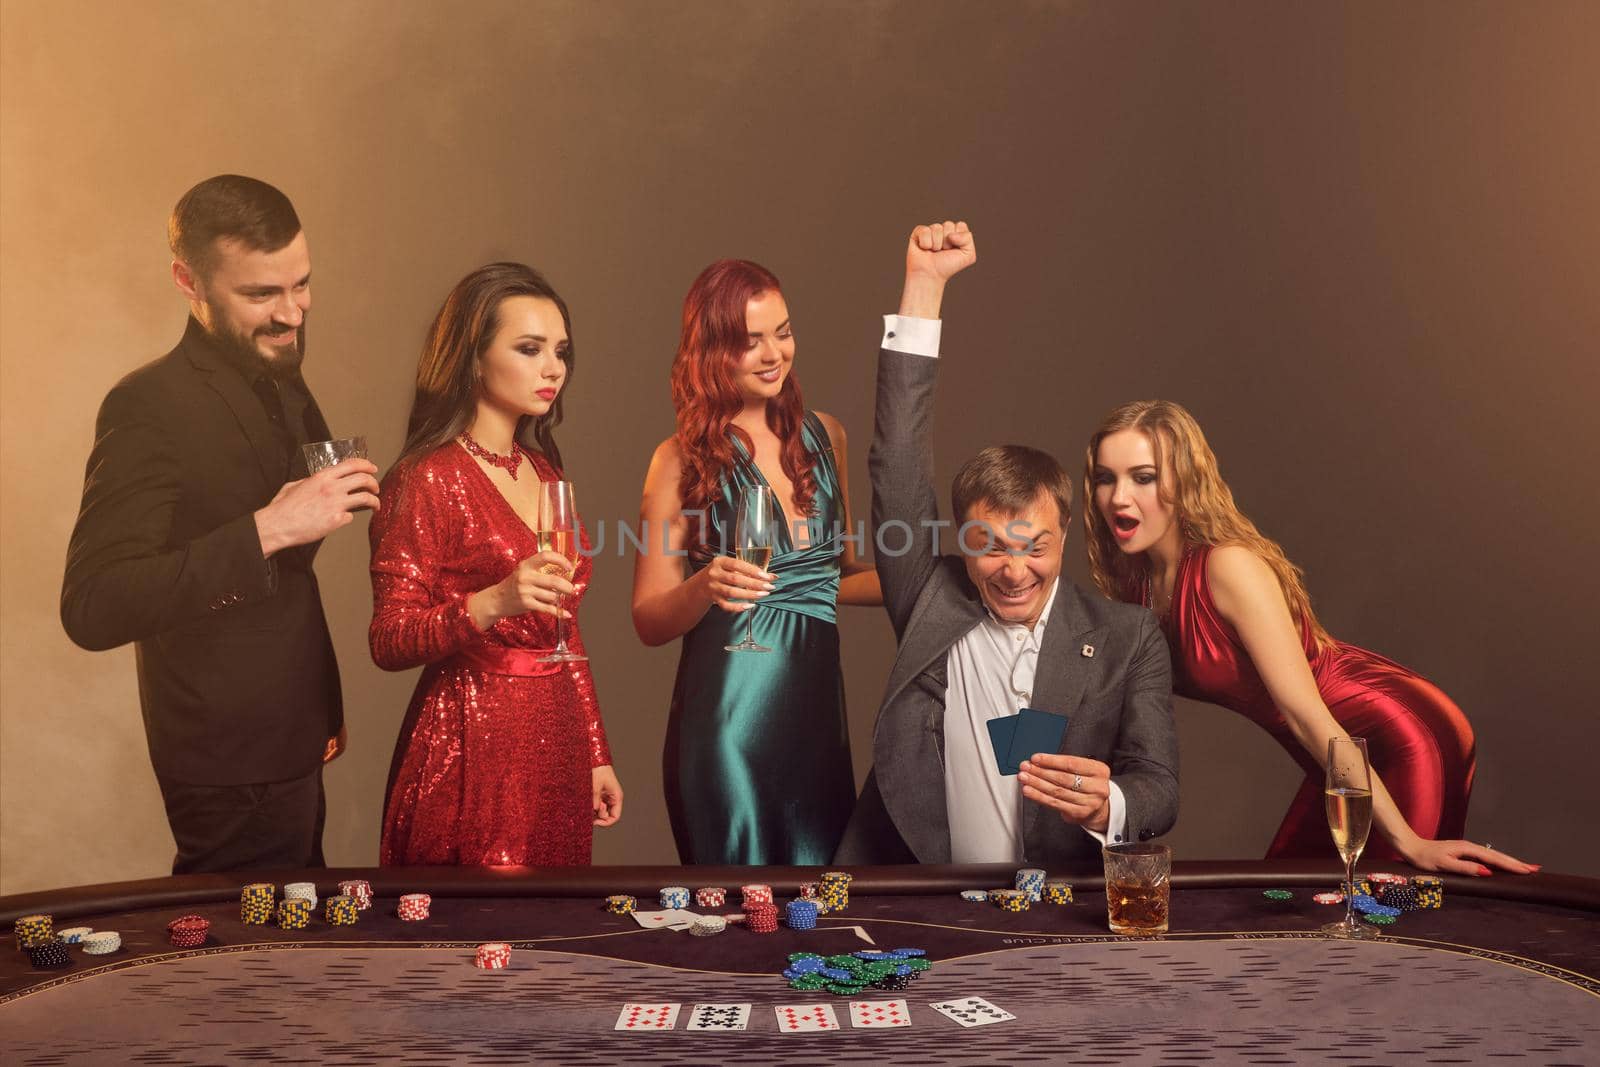 Funny buddies are playing poker at casino. They are celebrating their win, smiling and looking vey excited while posing at the table against a dark smoke background in a ray of a spotlight. Cards, chips, money, alcohol, gambling, entertainment concept.